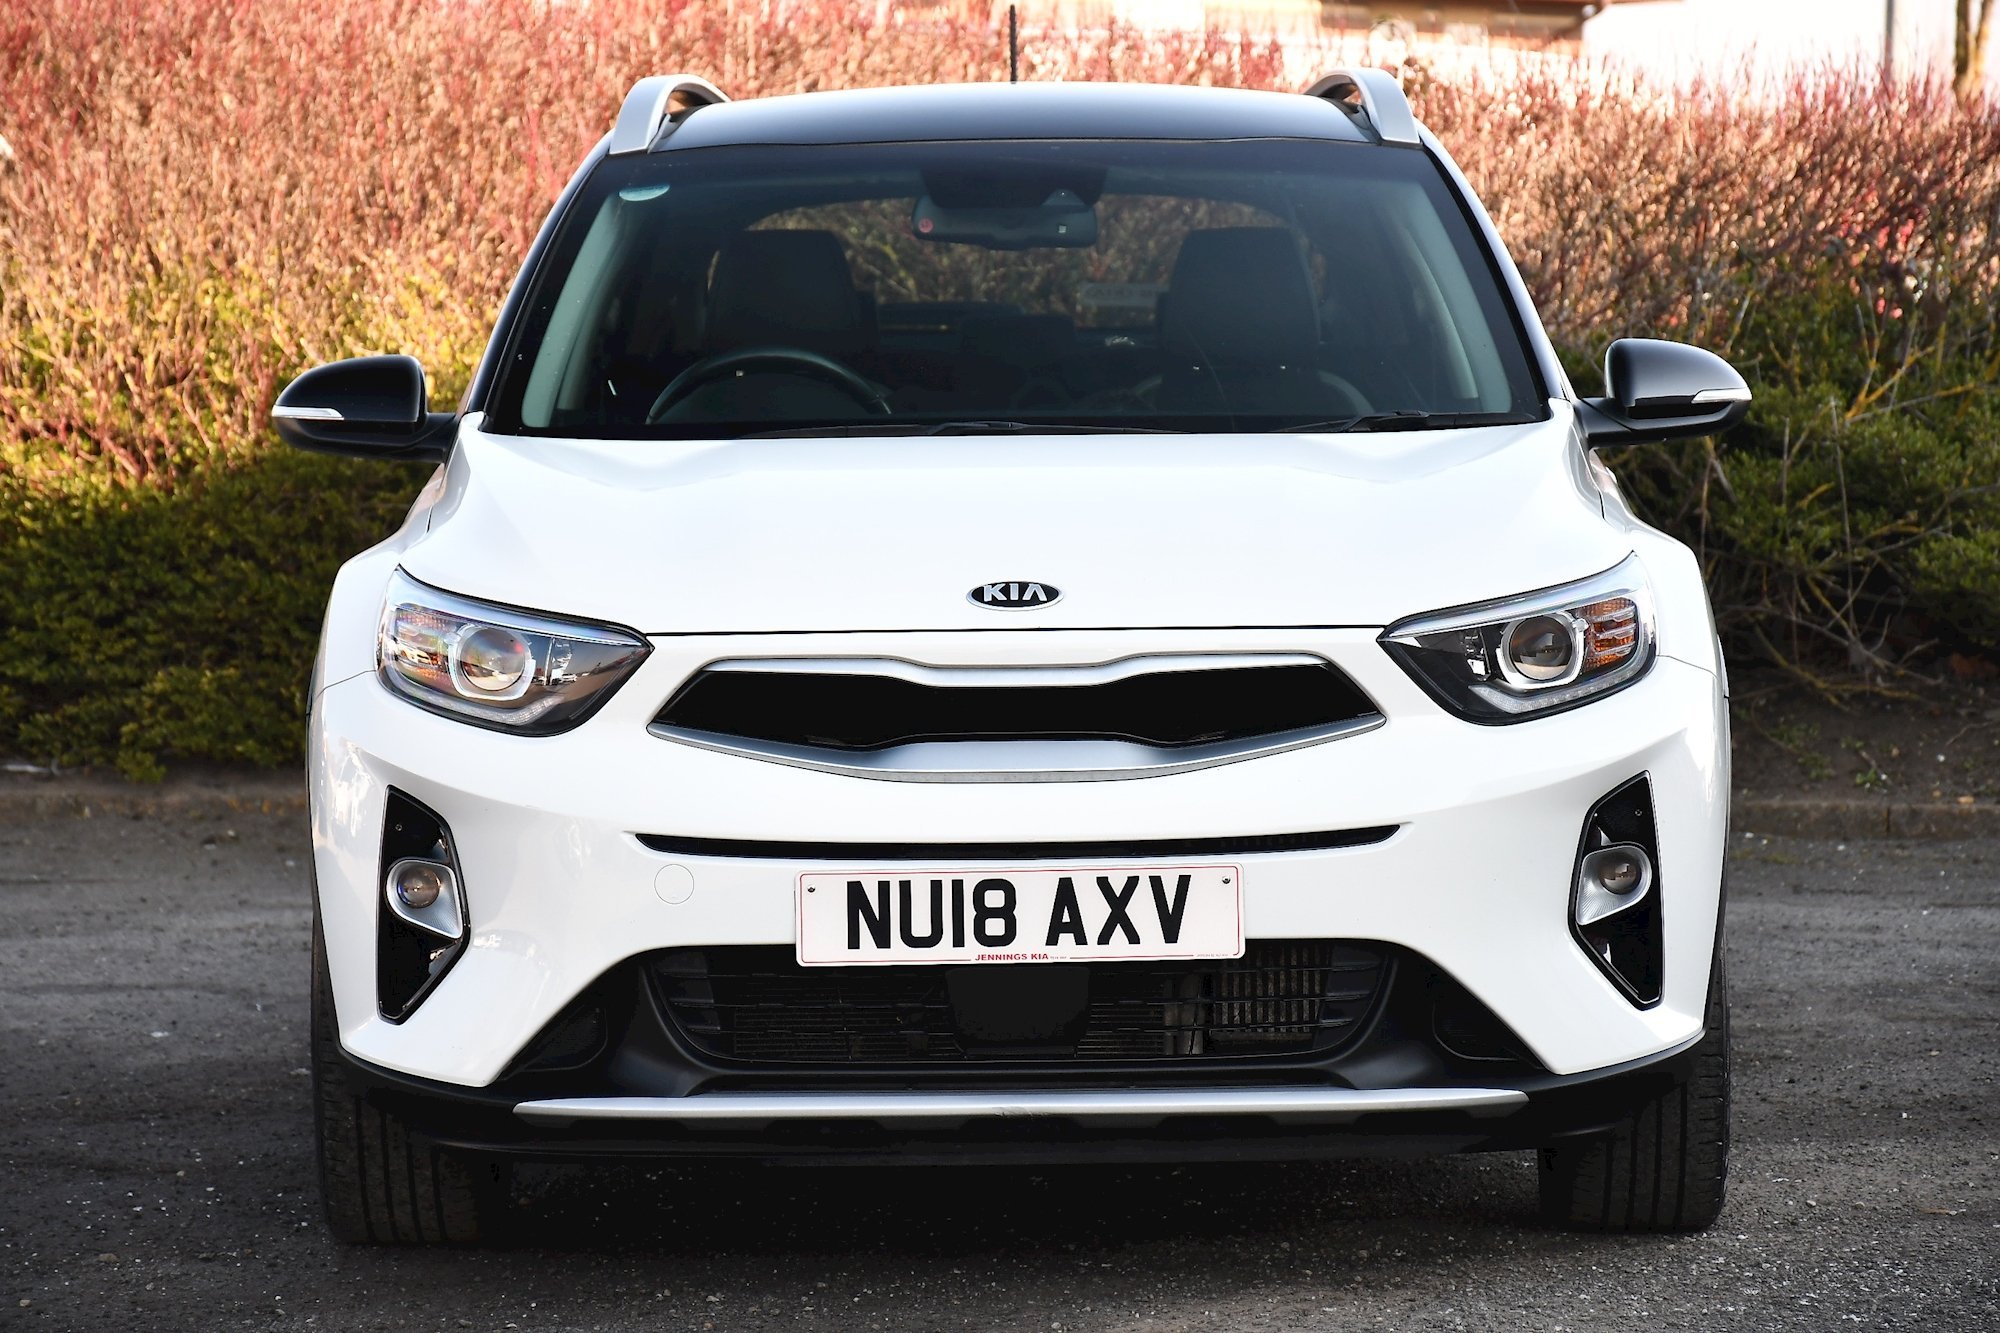 Used Kia Stonic 1.6 CRDi First Edition SUV 5dr Diesel (s/s) (108 bhp) 2018  5dr Manual (NU18AXV)